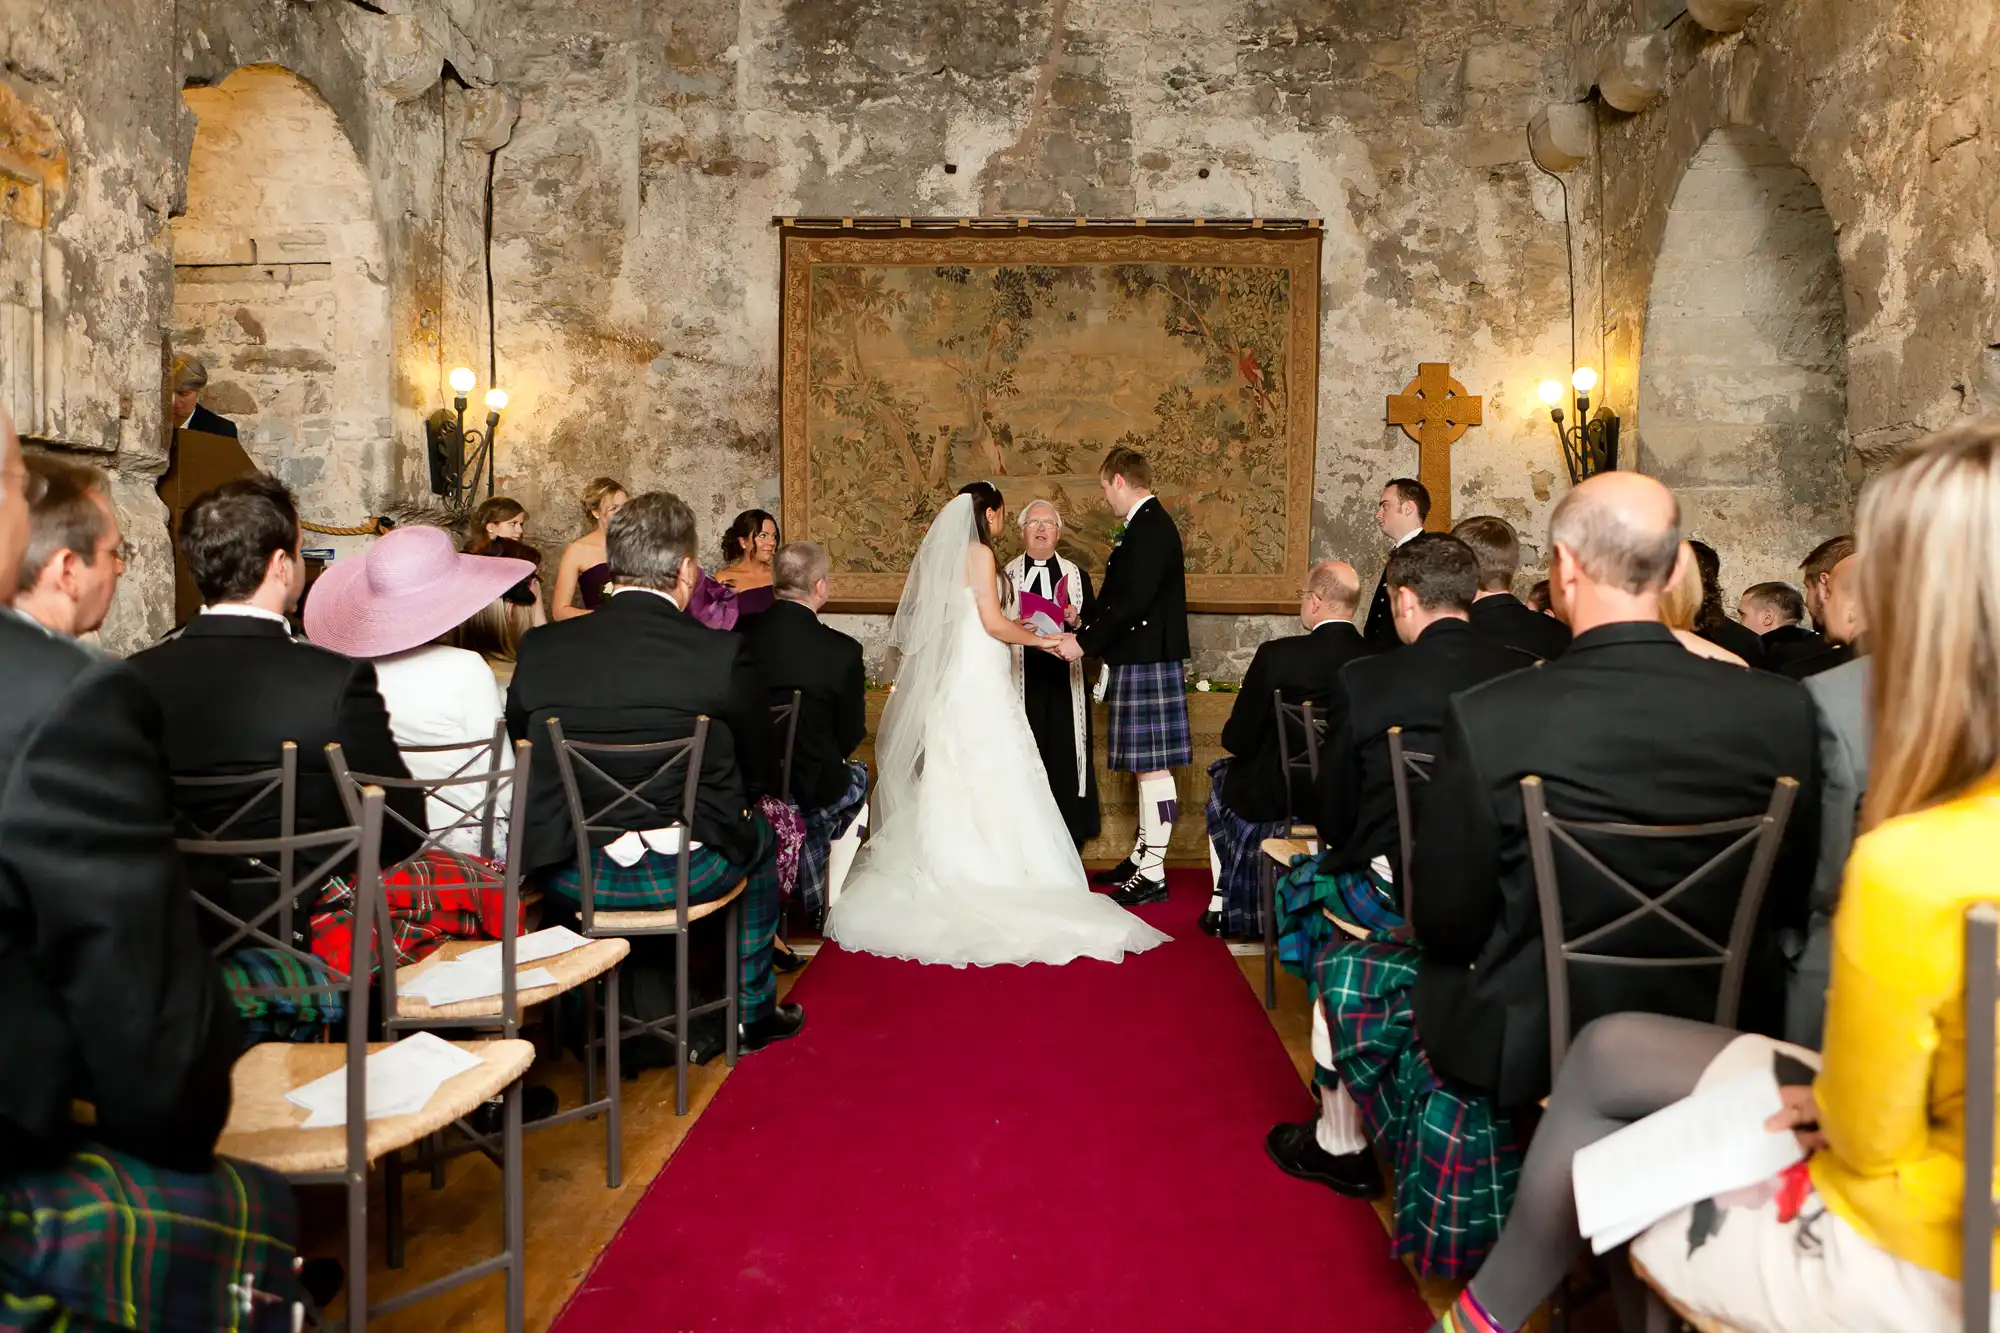 A bride and groom holding hands at the altar during a wedding ceremony in a rustic chapel, with guests in formal attire, some wearing kilts.